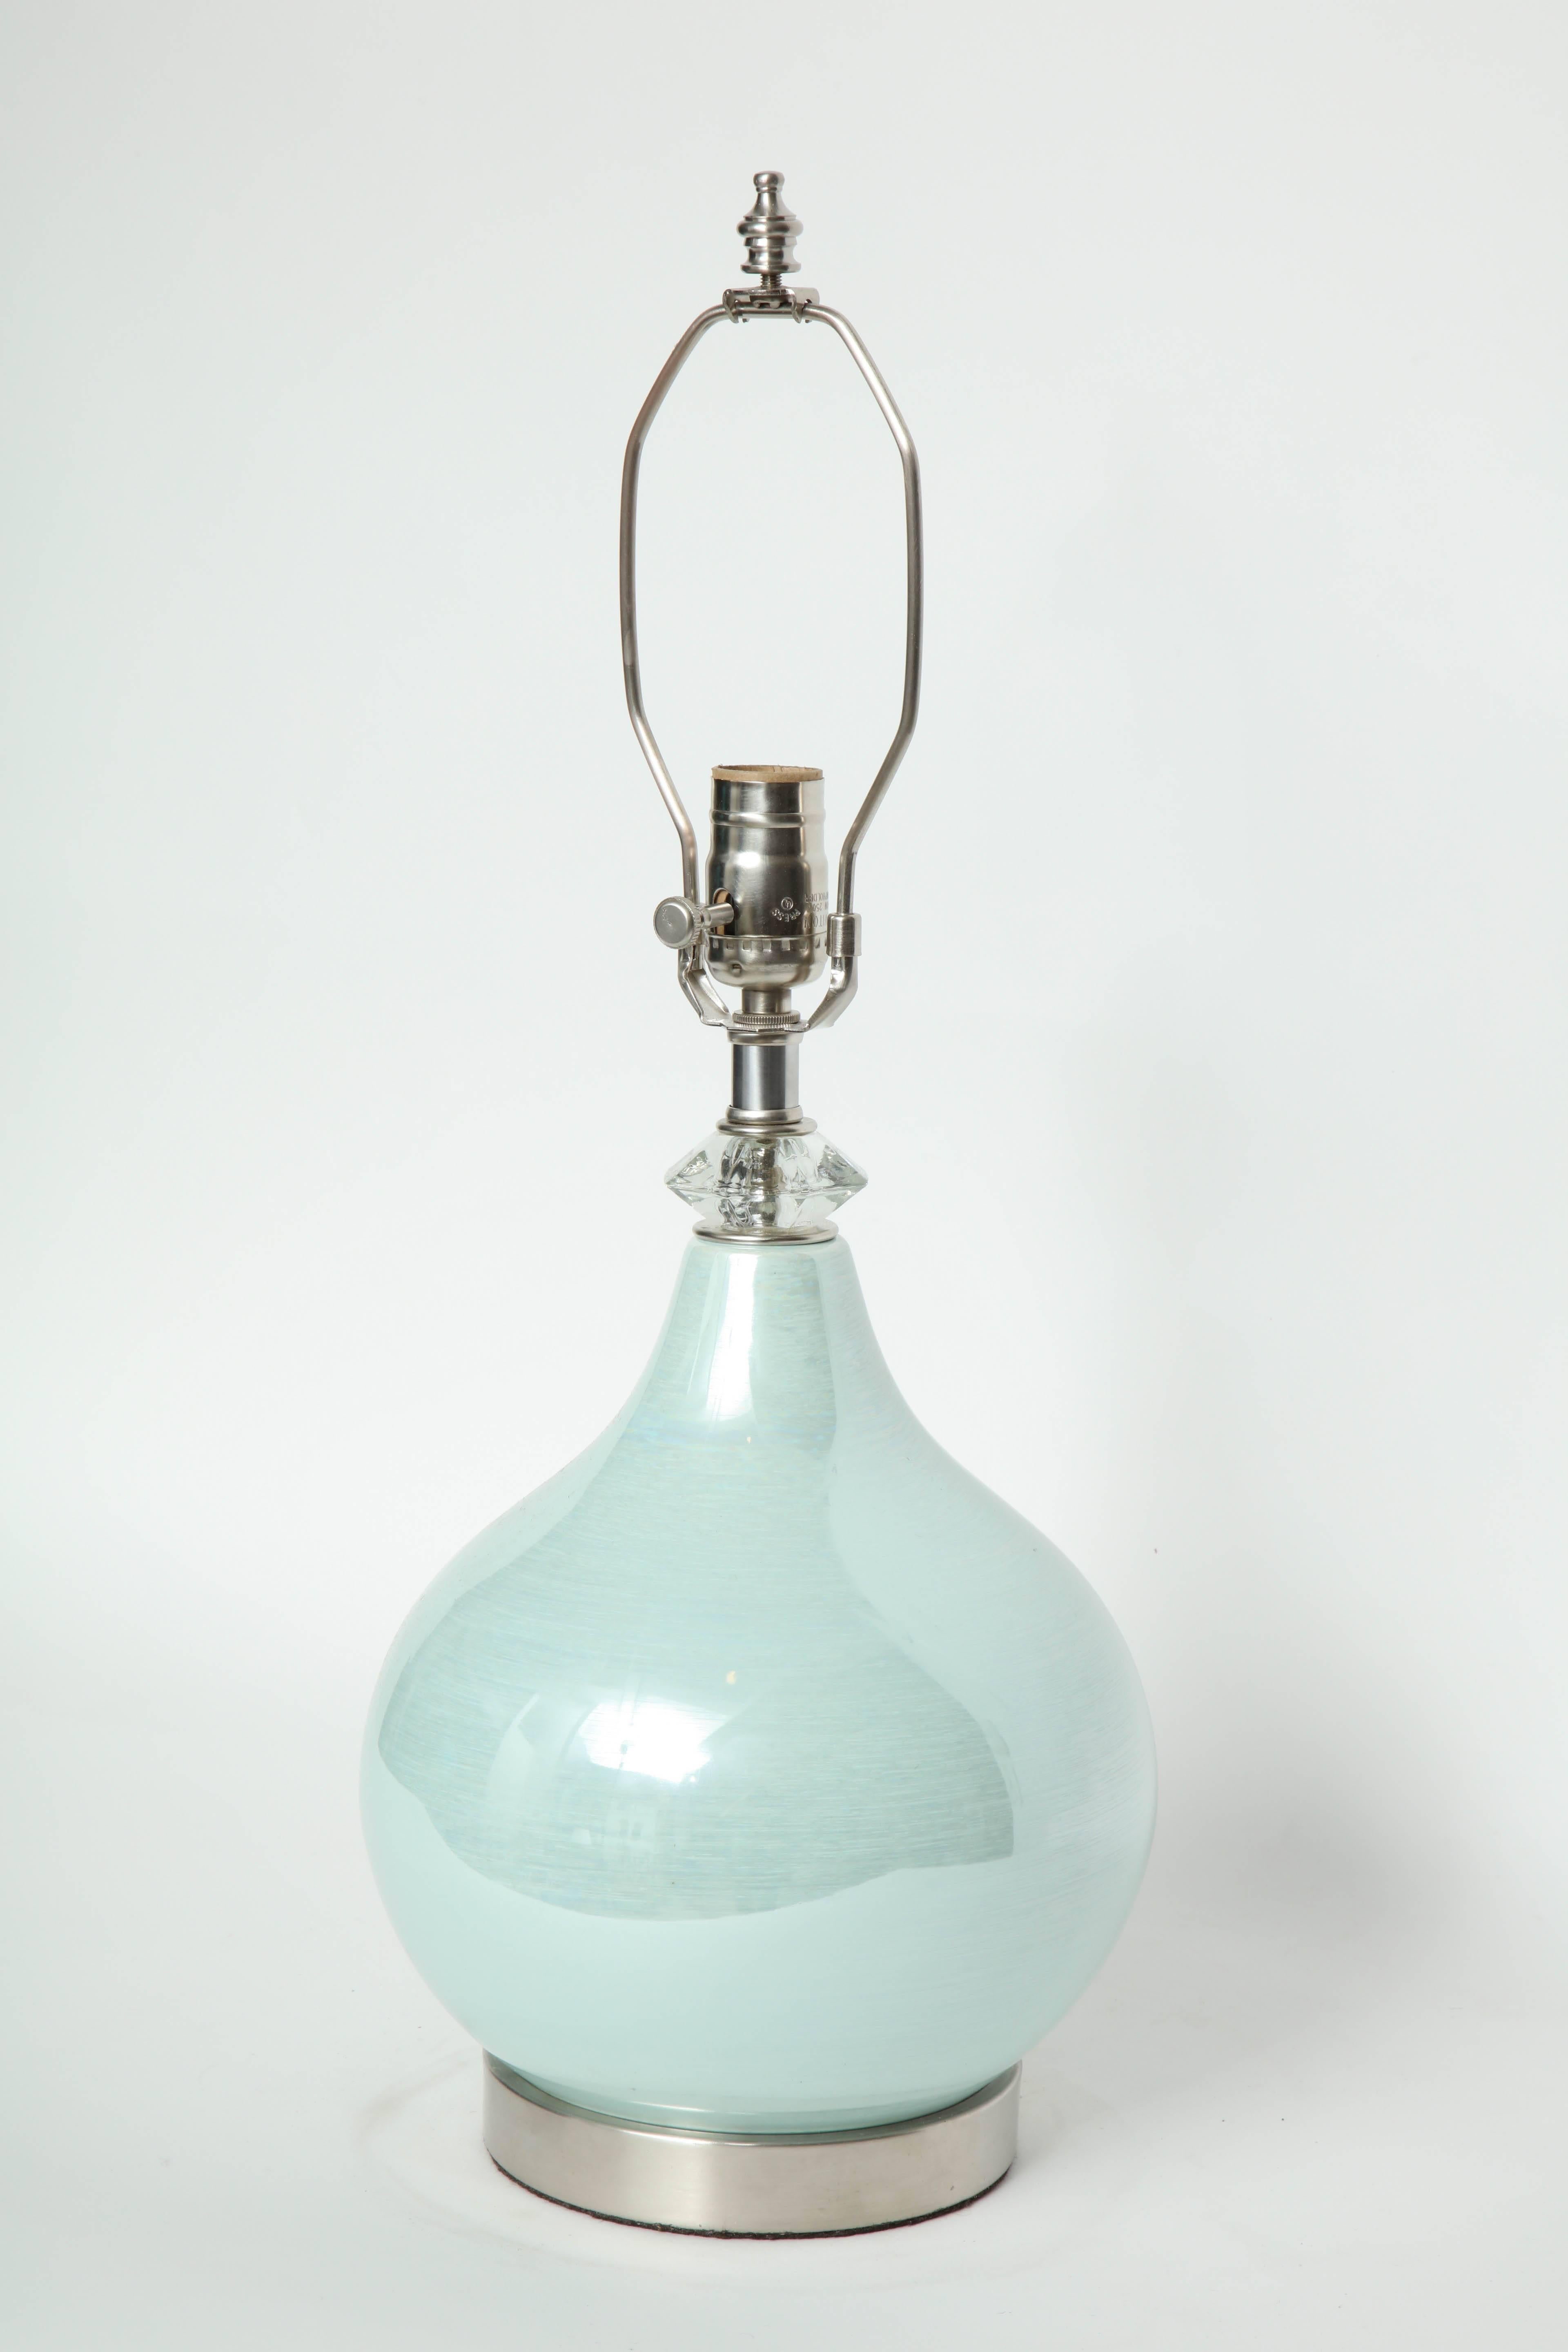 Pair of onion shaped orb porcelain lamps in a beautiful sea foam green glaze on brushed nickel bases and faceted crystal collar. Rewired for use in the USA. 100W max bulbs.